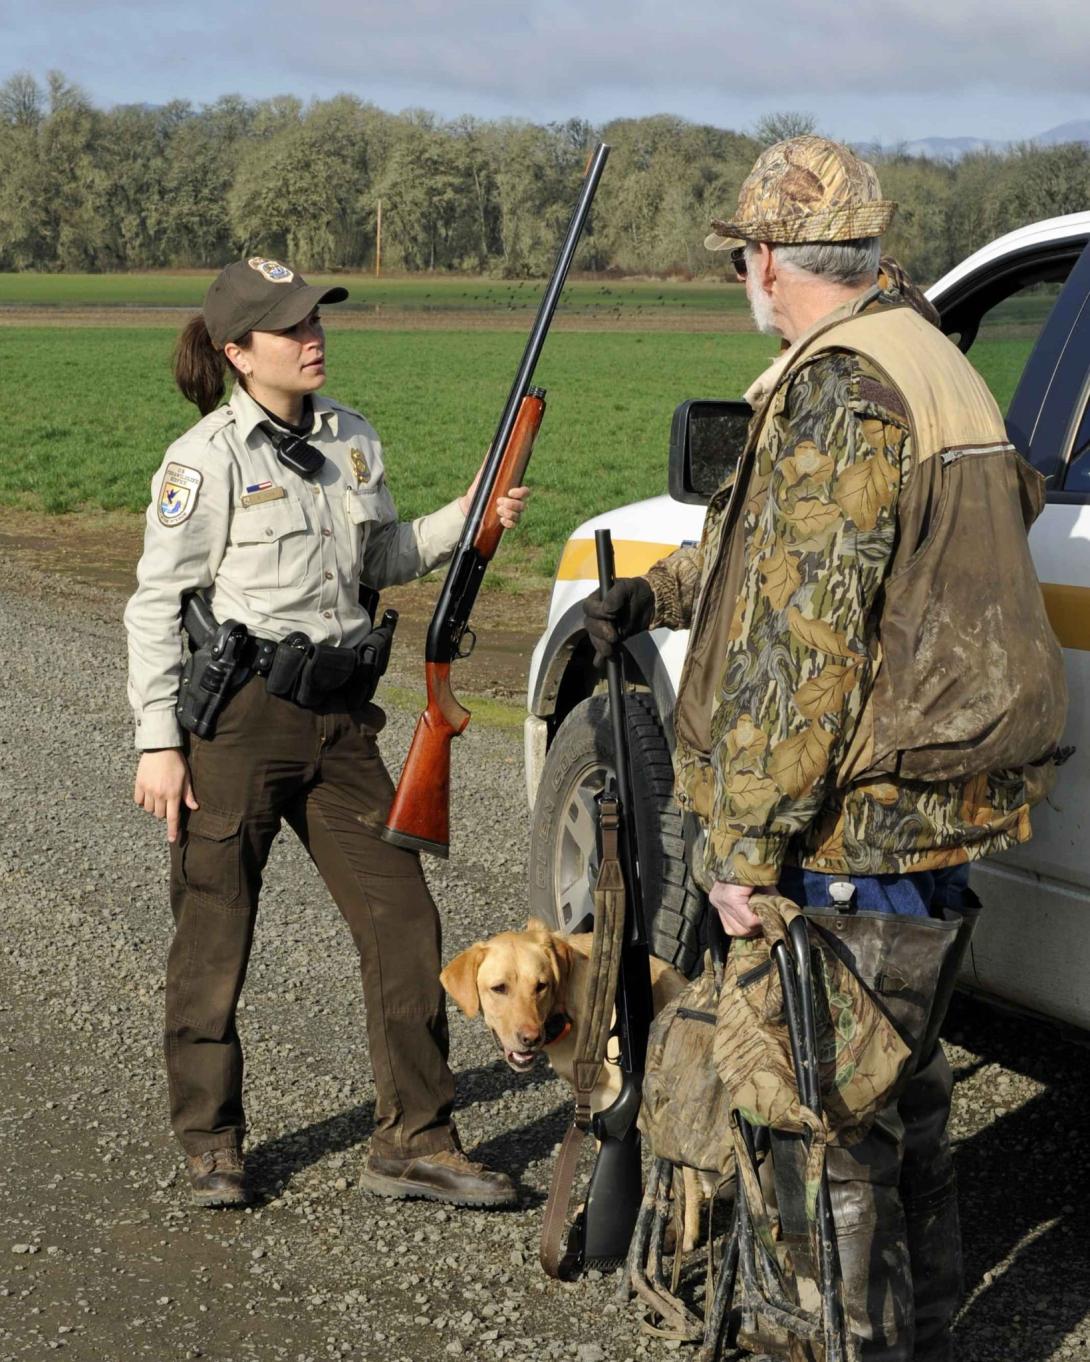 A conservation law enforcement officer talks with a hunter